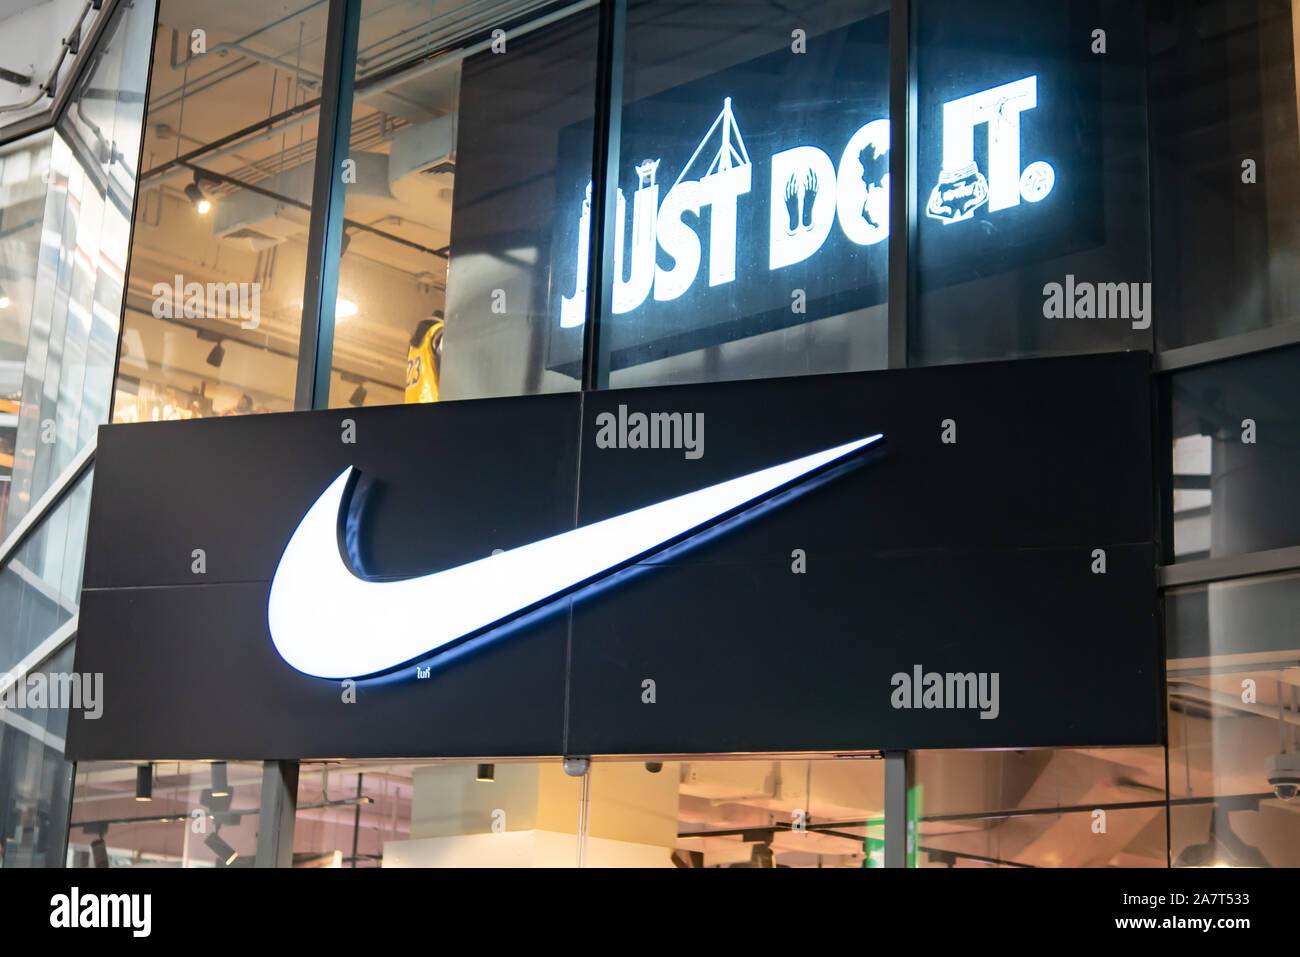 Nike just do it slogan High Resolution Stock Photography and Images - Alamy